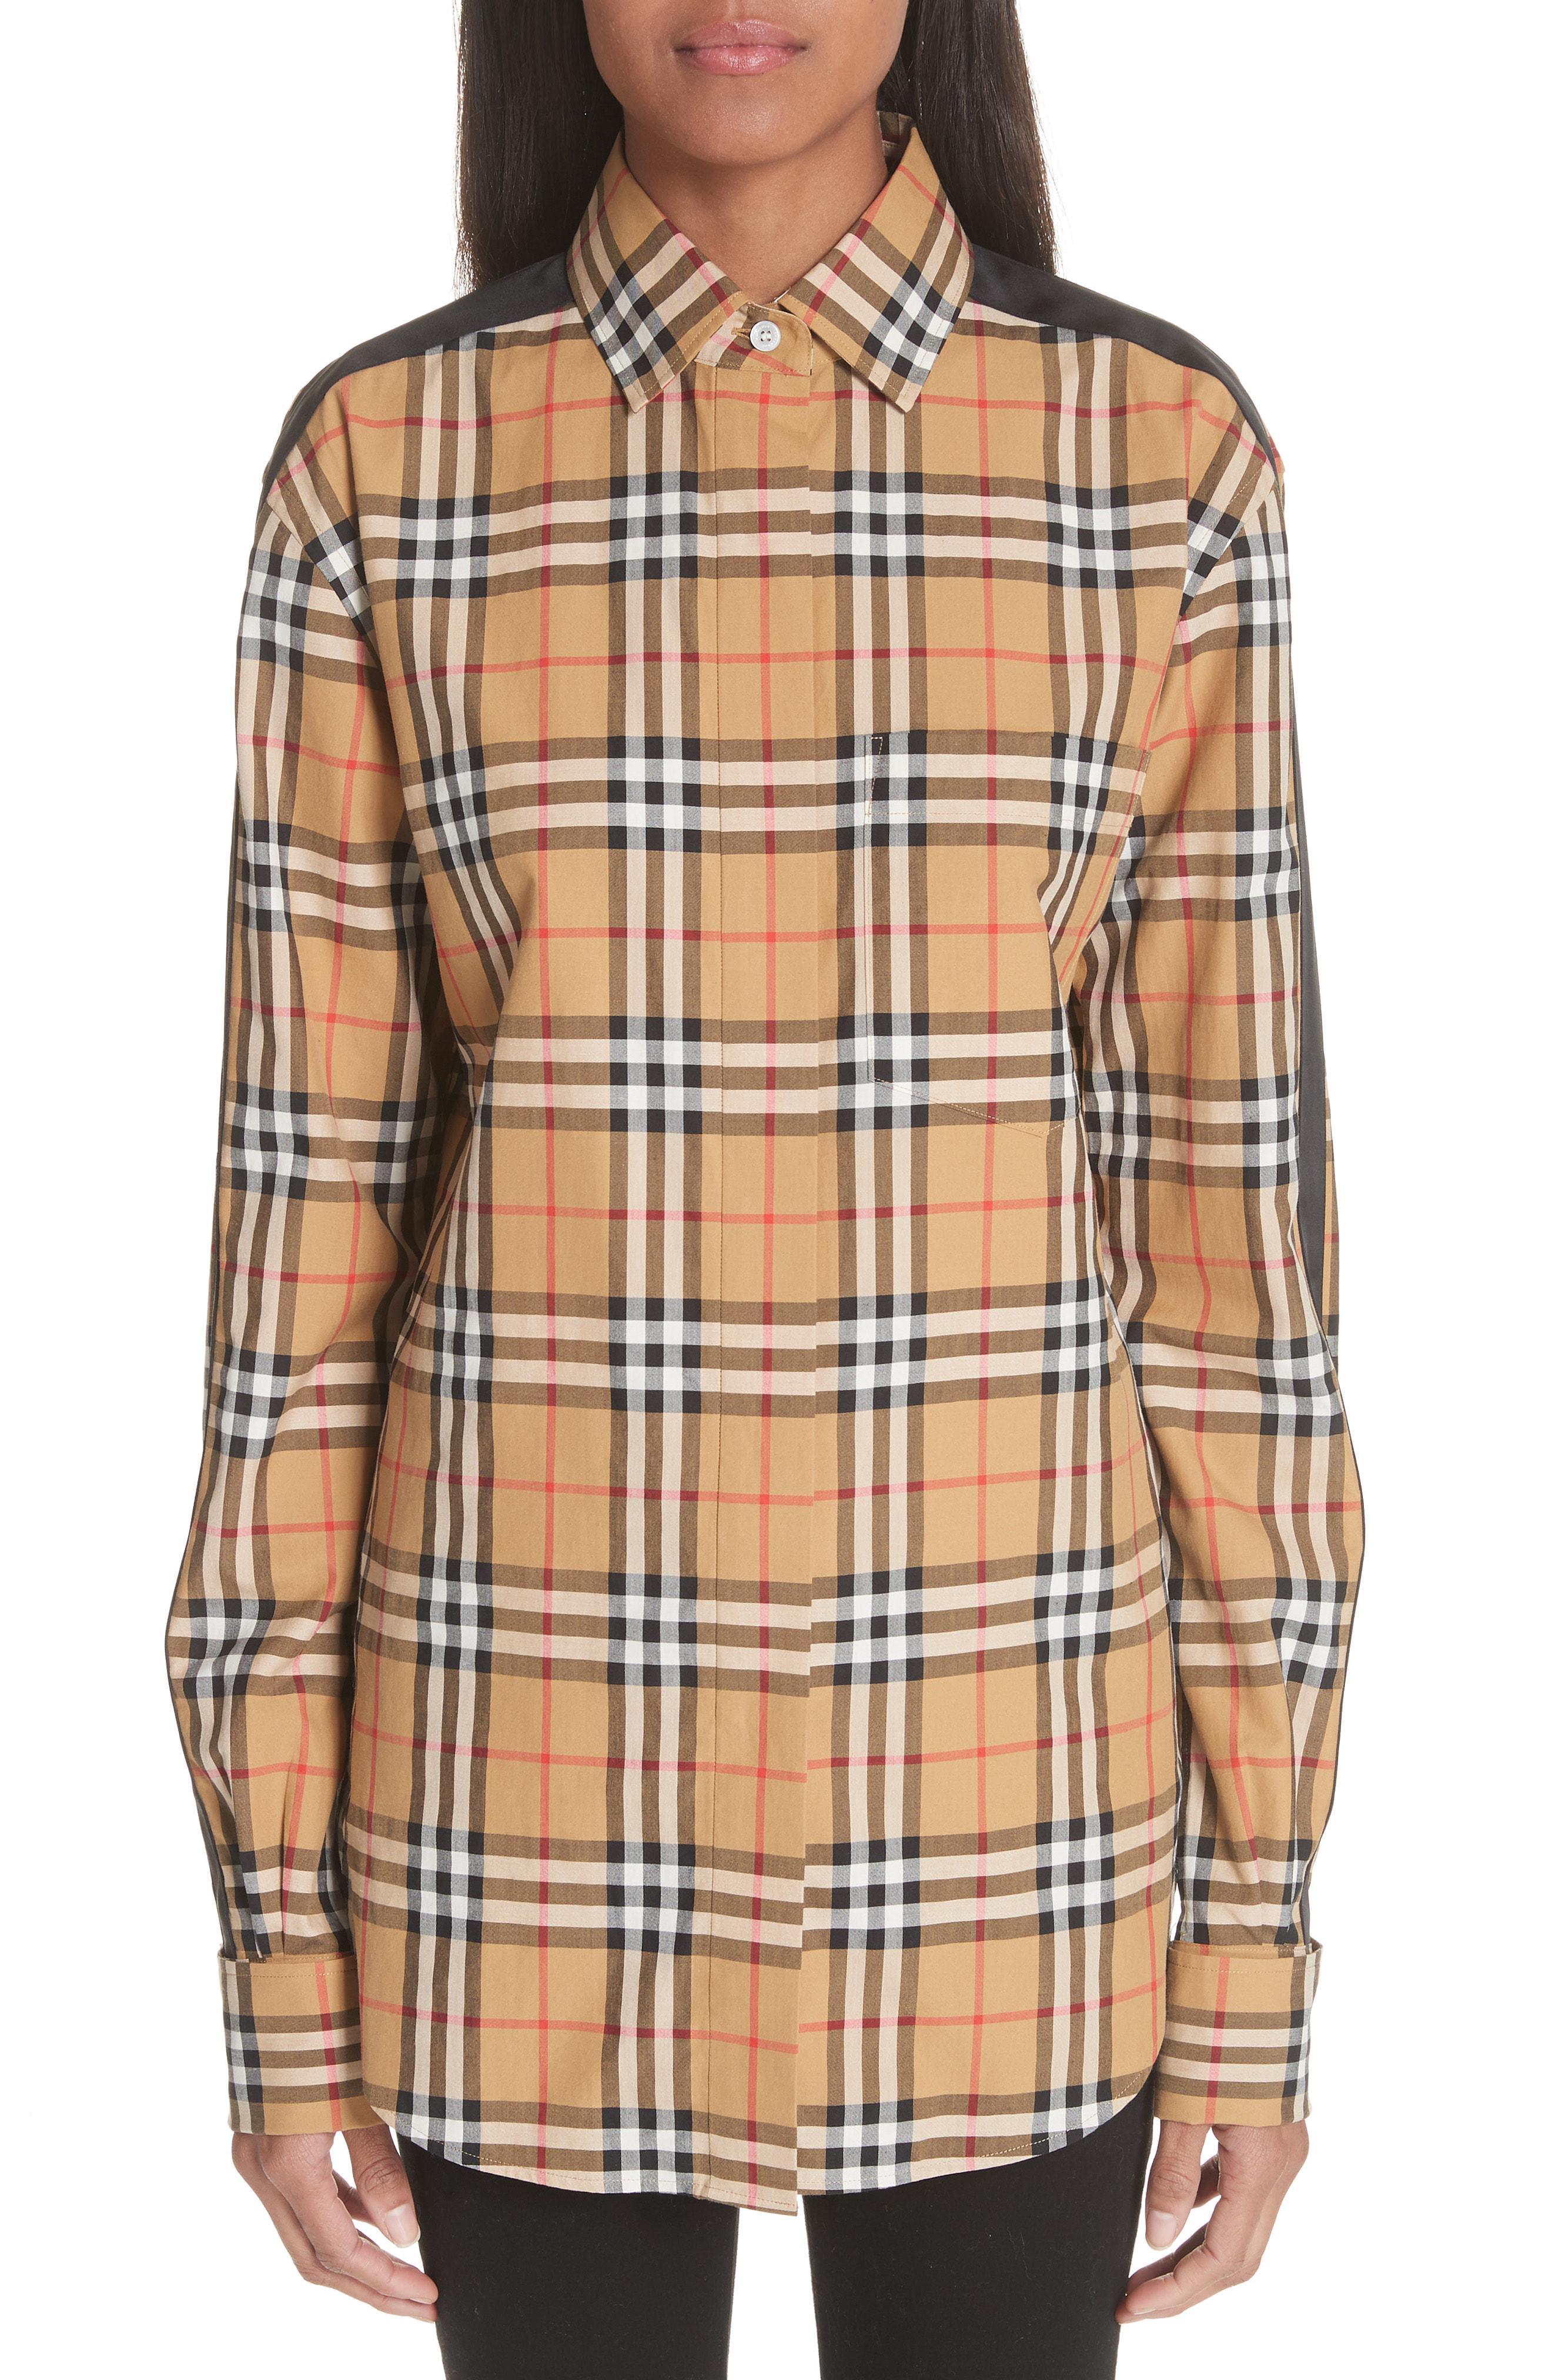 Burberry Cotton Check Print Shirt in Brown - Lyst